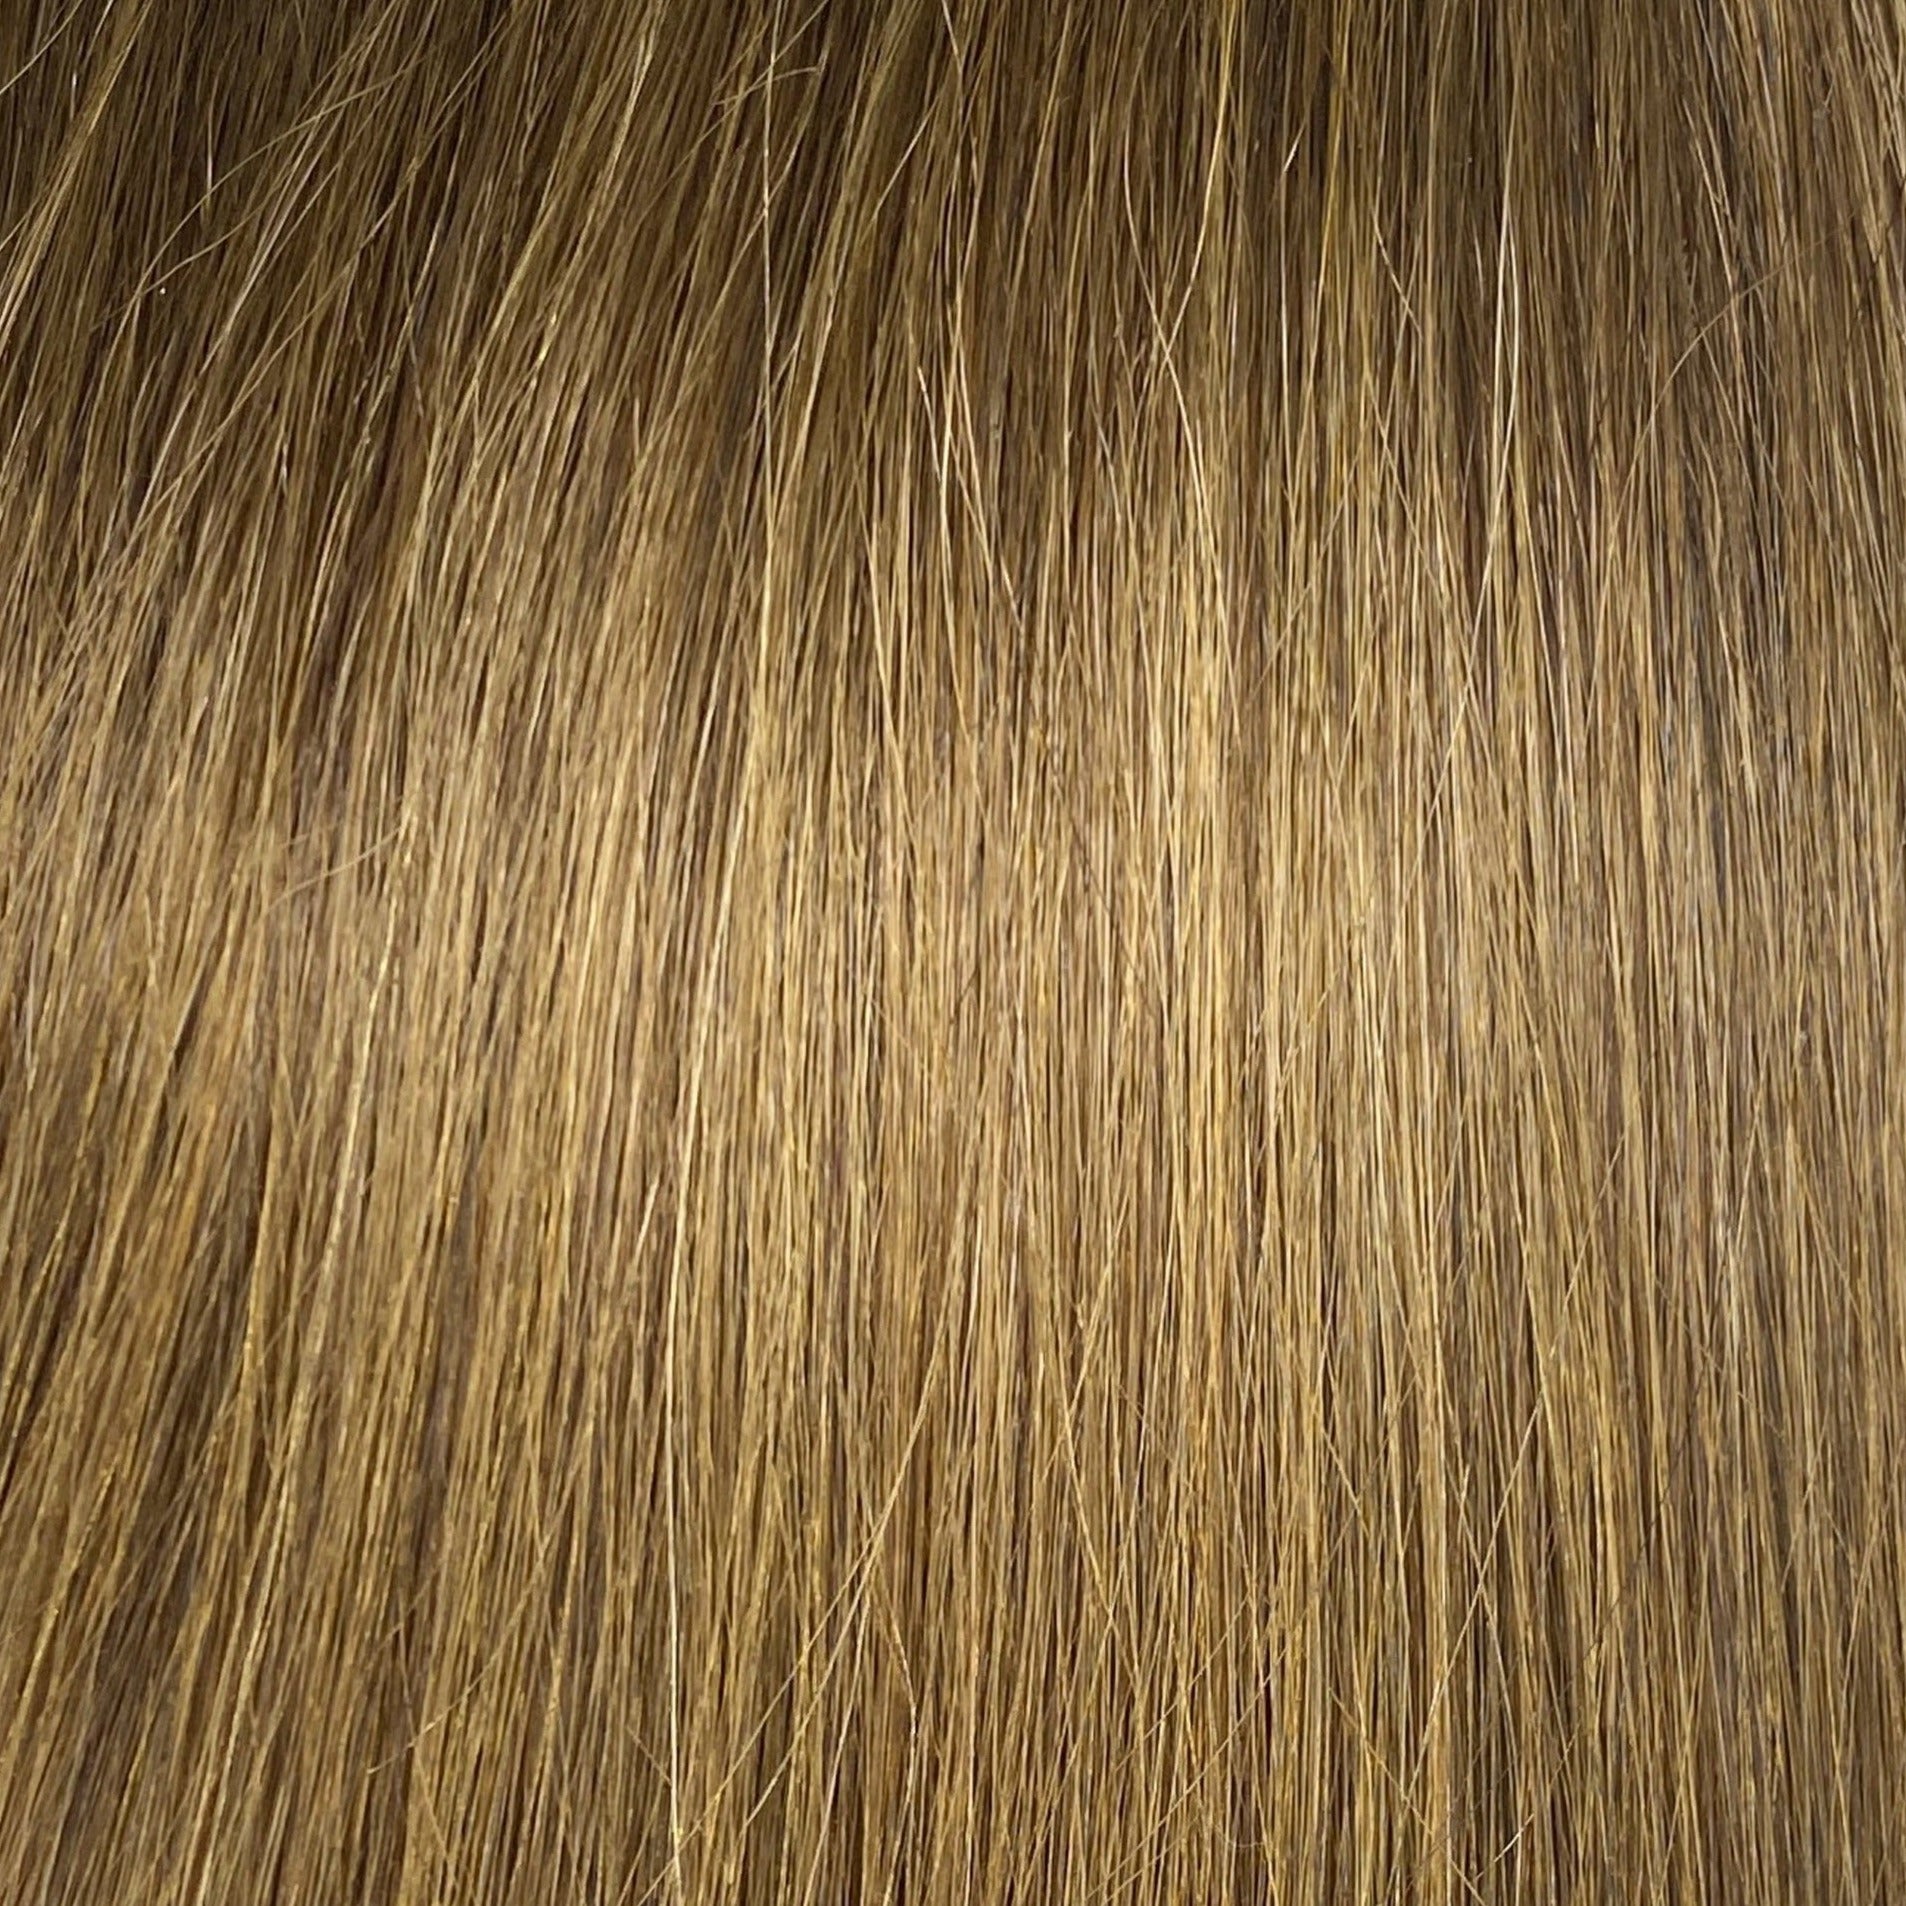 Velo Sale #2 - 16 inches - Chestnut